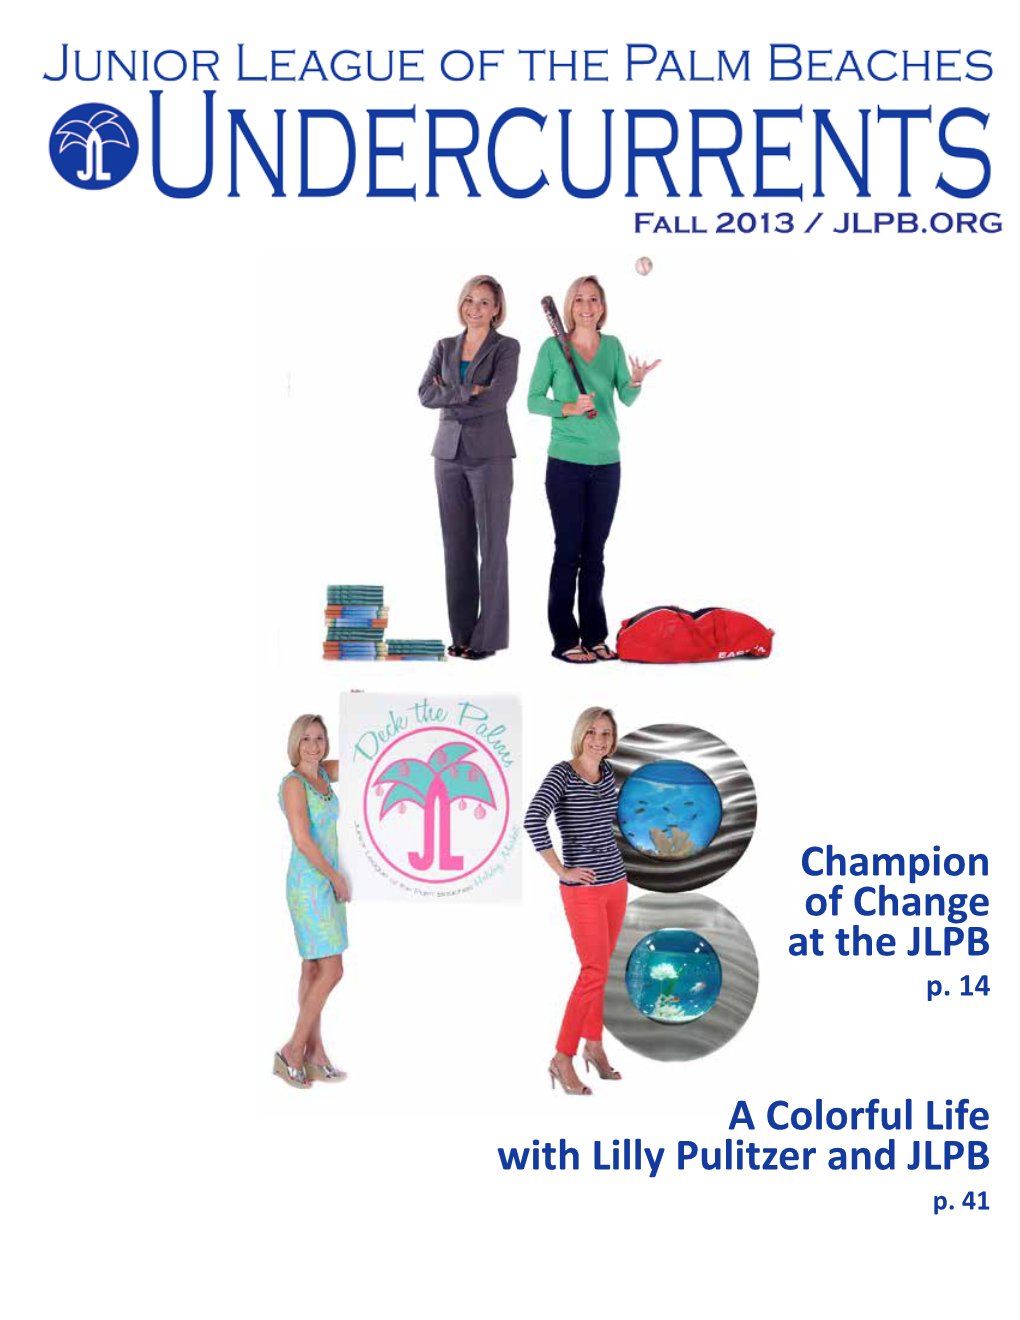 Champion of Change at the JLPB a Colorful Life with Lilly Pulitzer And